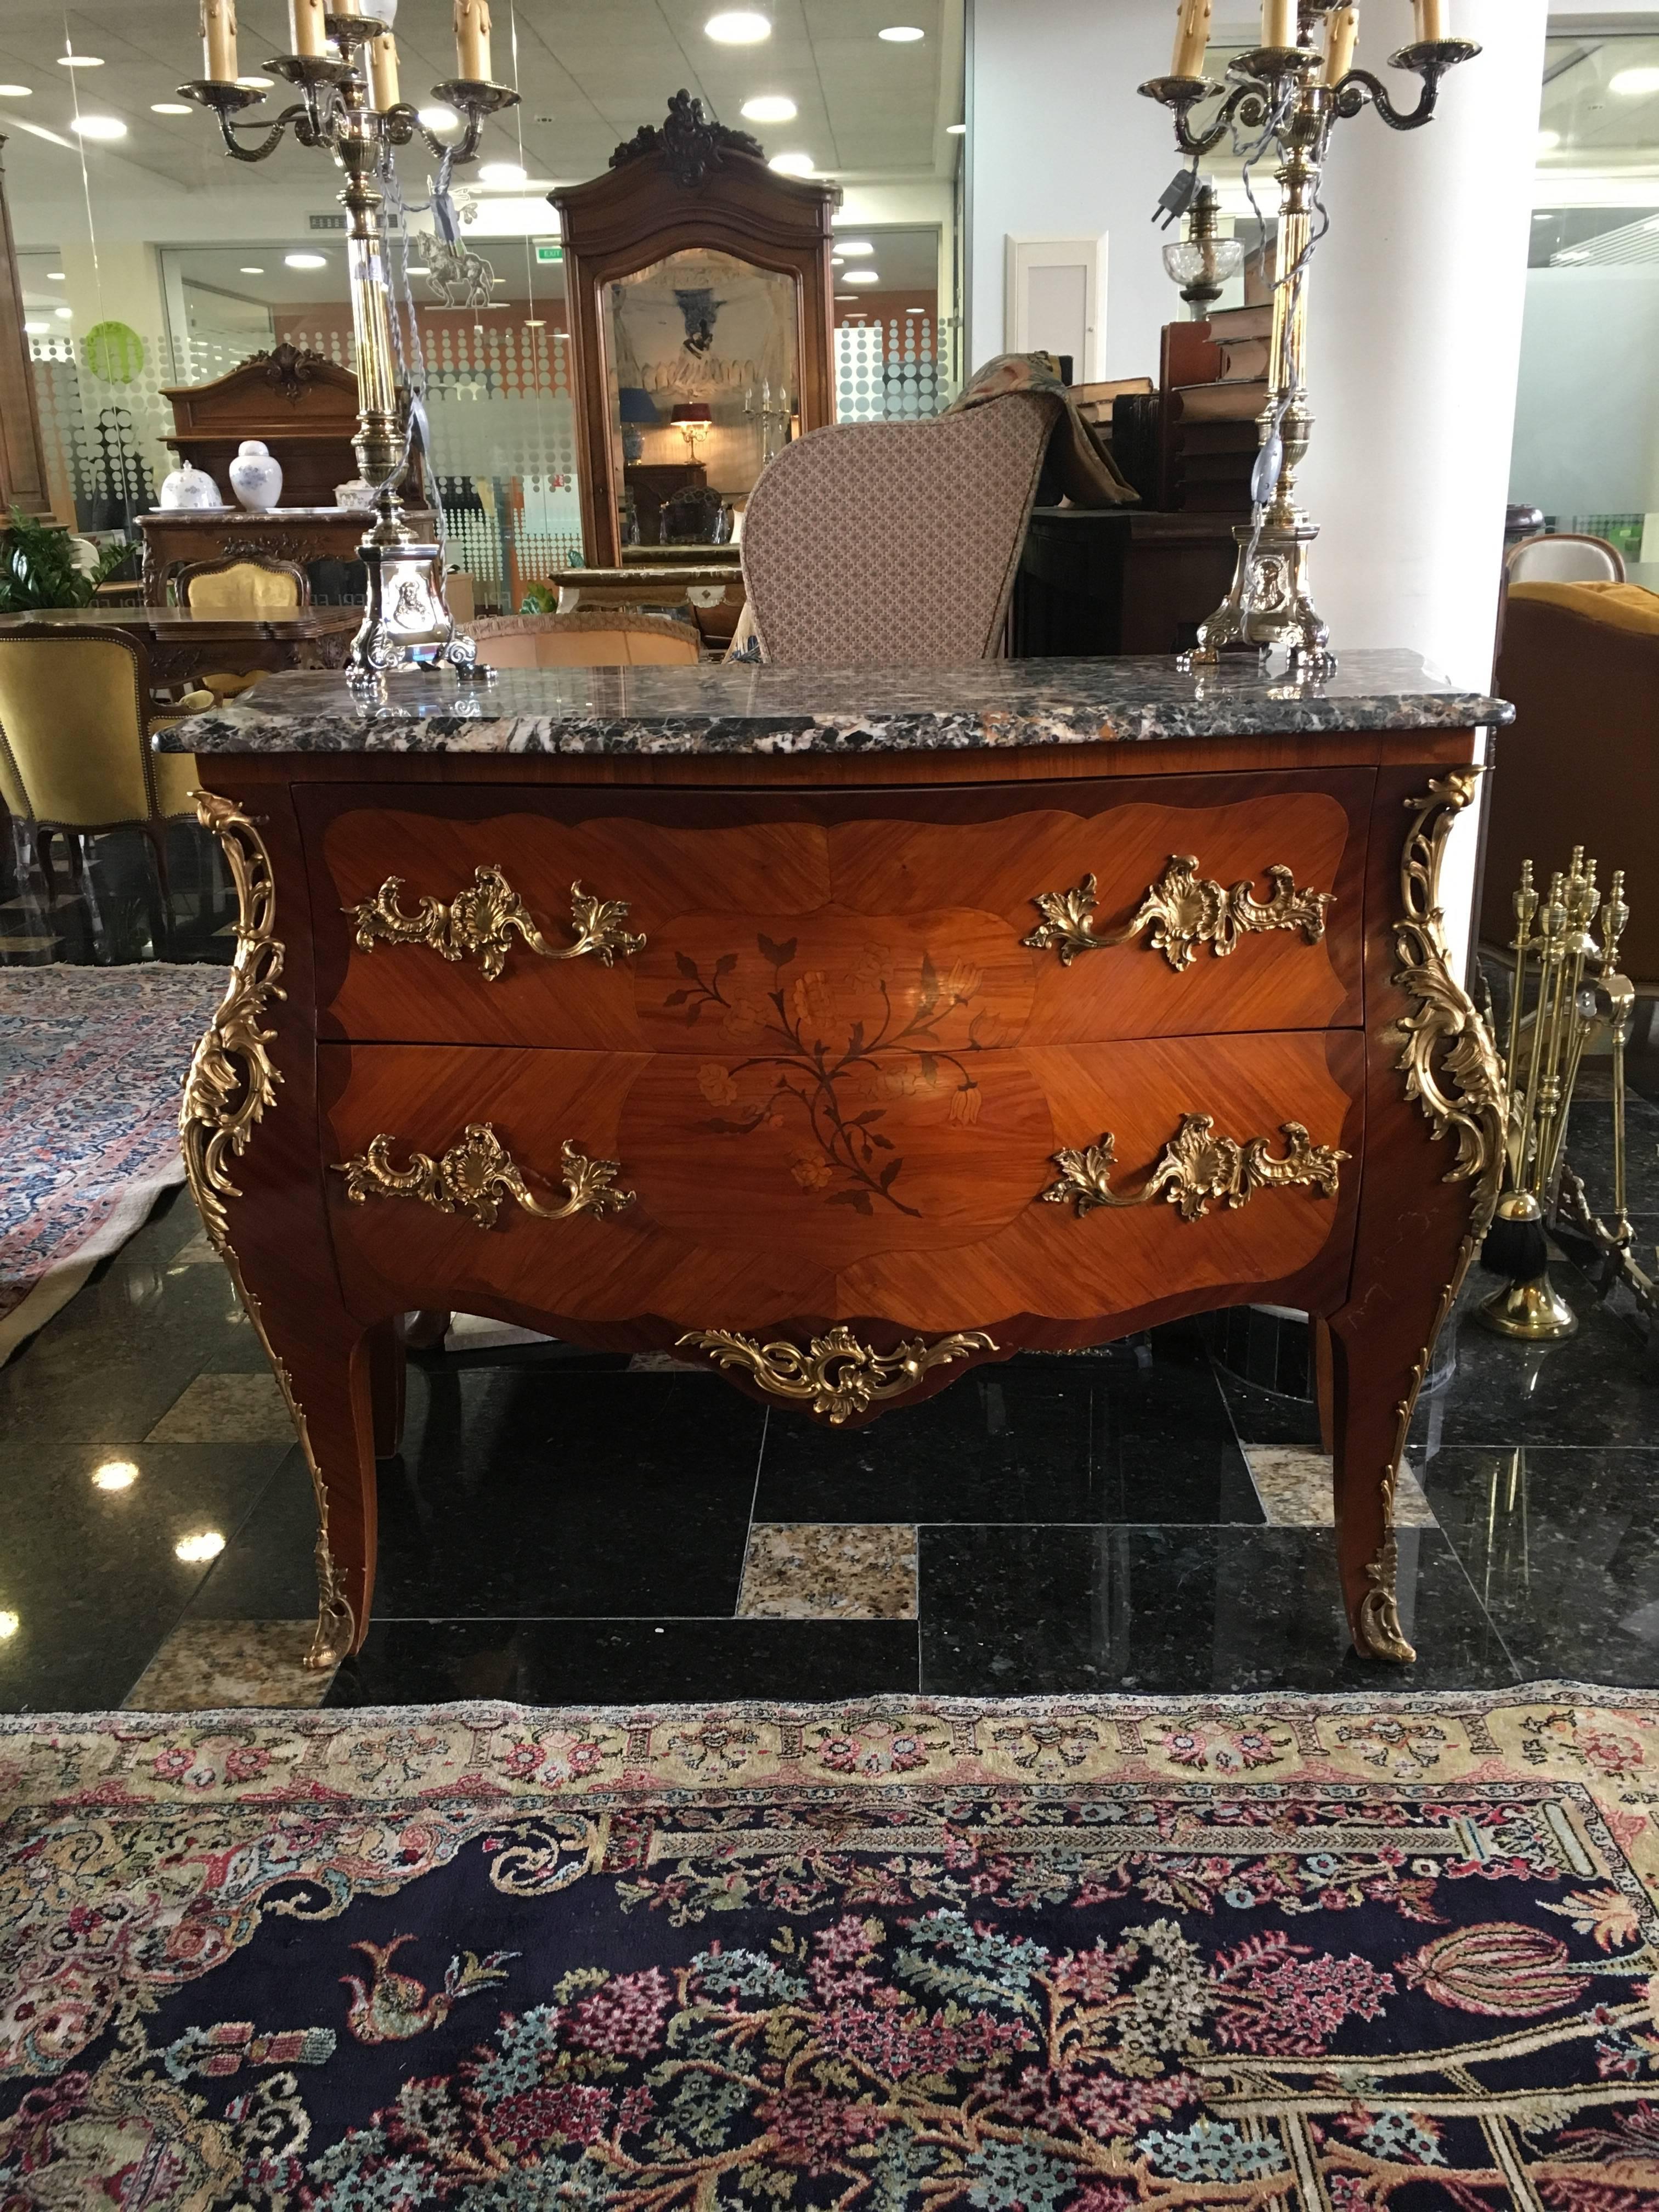 Magnificent 19th century marble-top two-drawer bombe commode from Paris, circa 1880. This commode is made from rosewood and features exquisite floral marquetry decoration and original bronze elements and handles. 
Excellent condition.
France.